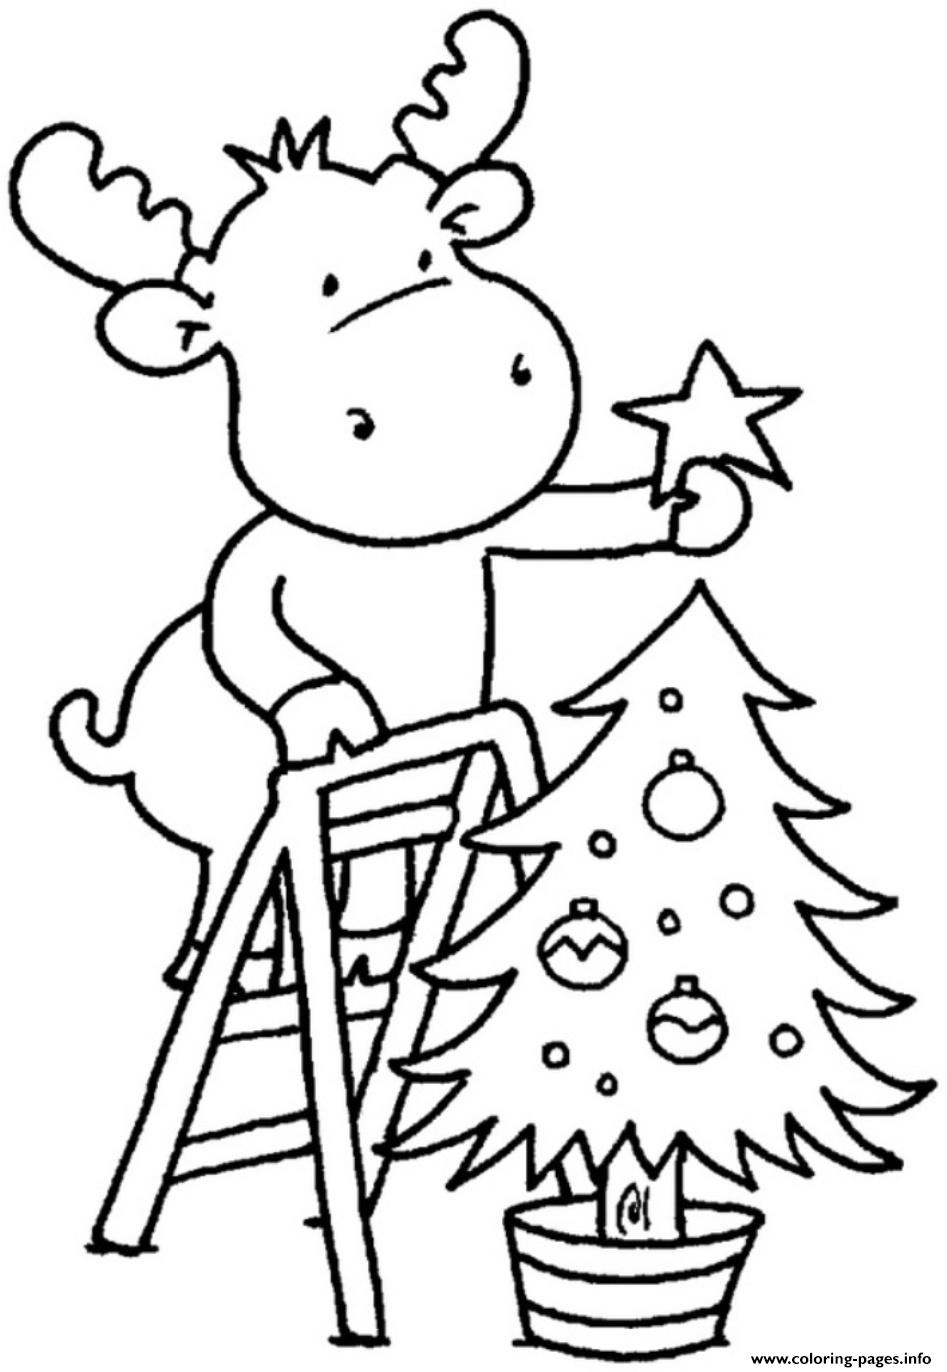 Christmas Tree For Children Coloring Page Printable